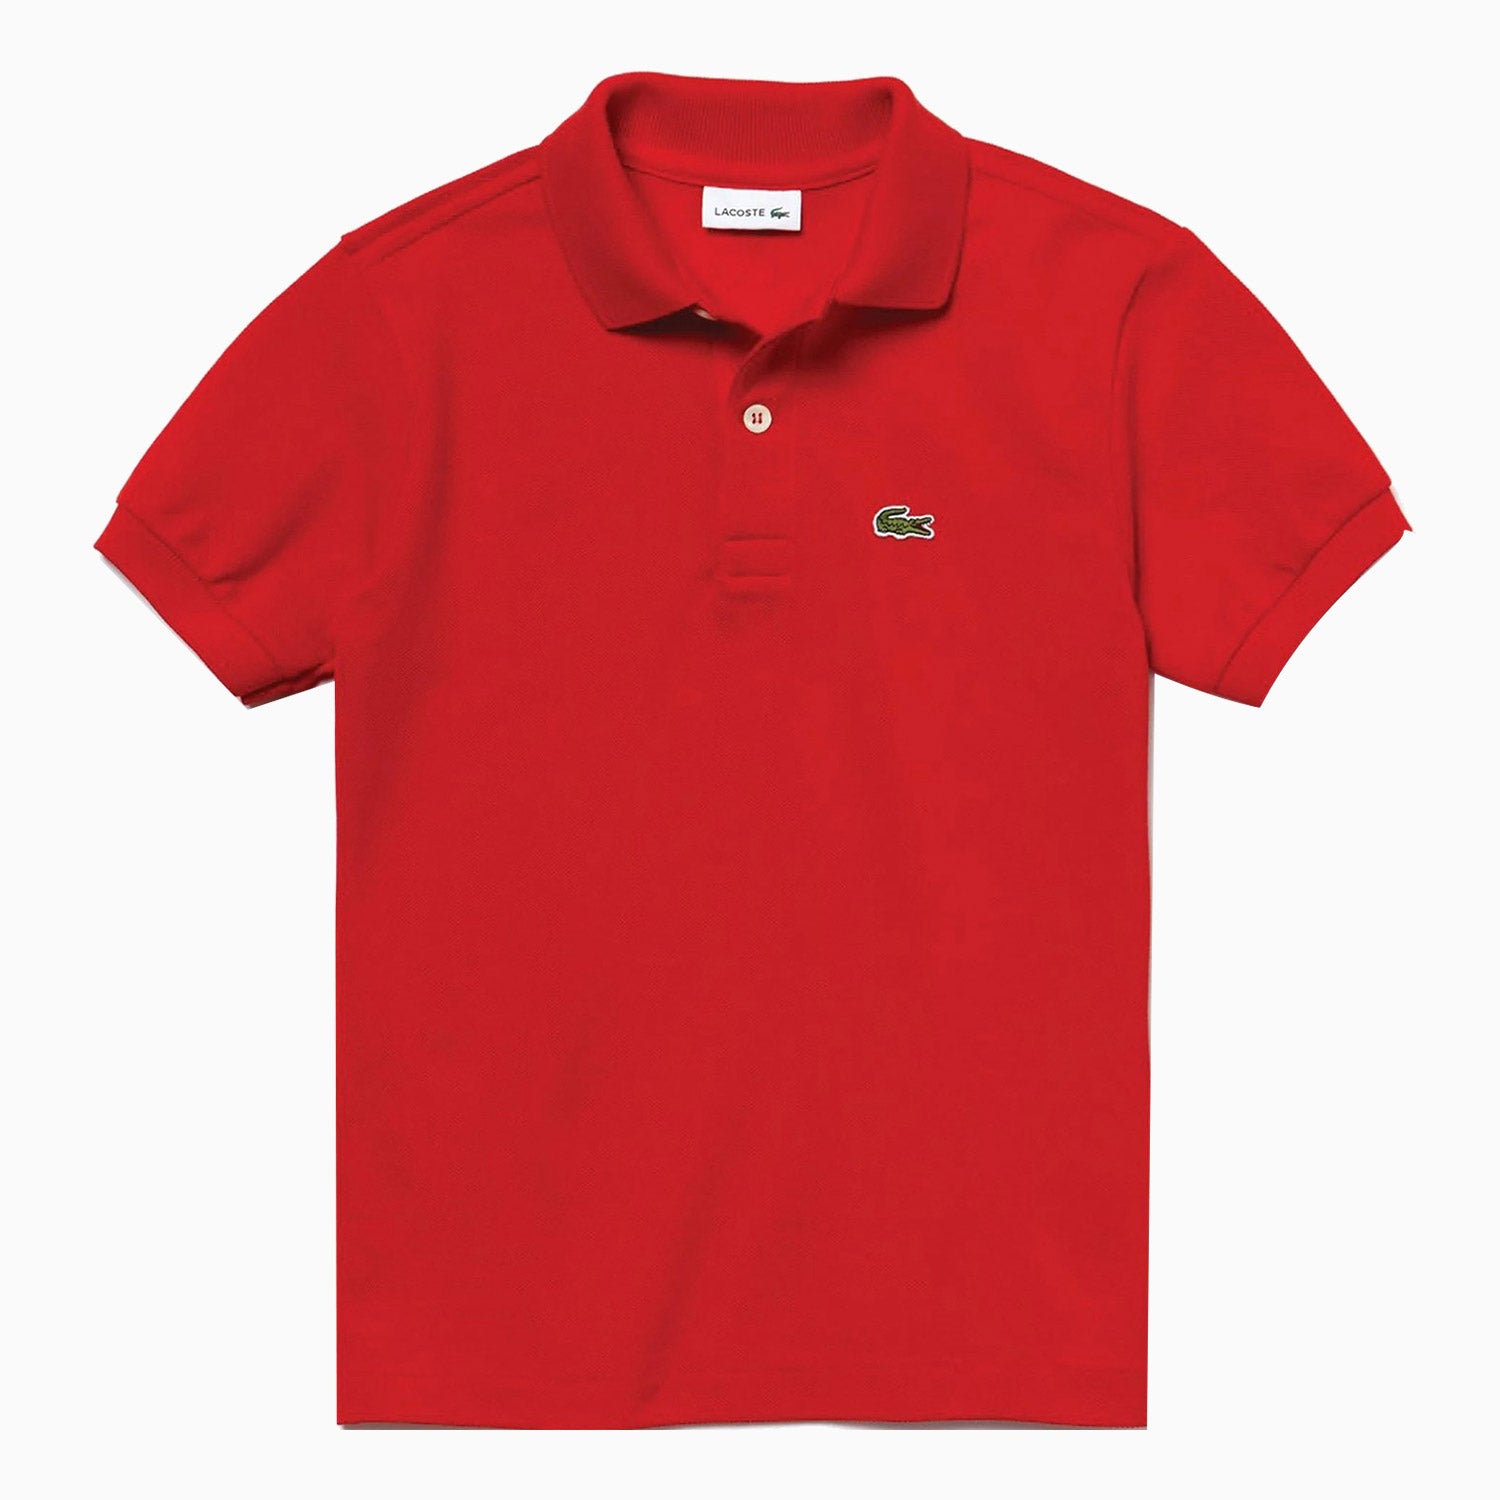 Lacoste | Kid's Classic Pique Polo Shirt - Color: RED - Kids Premium Clothing -